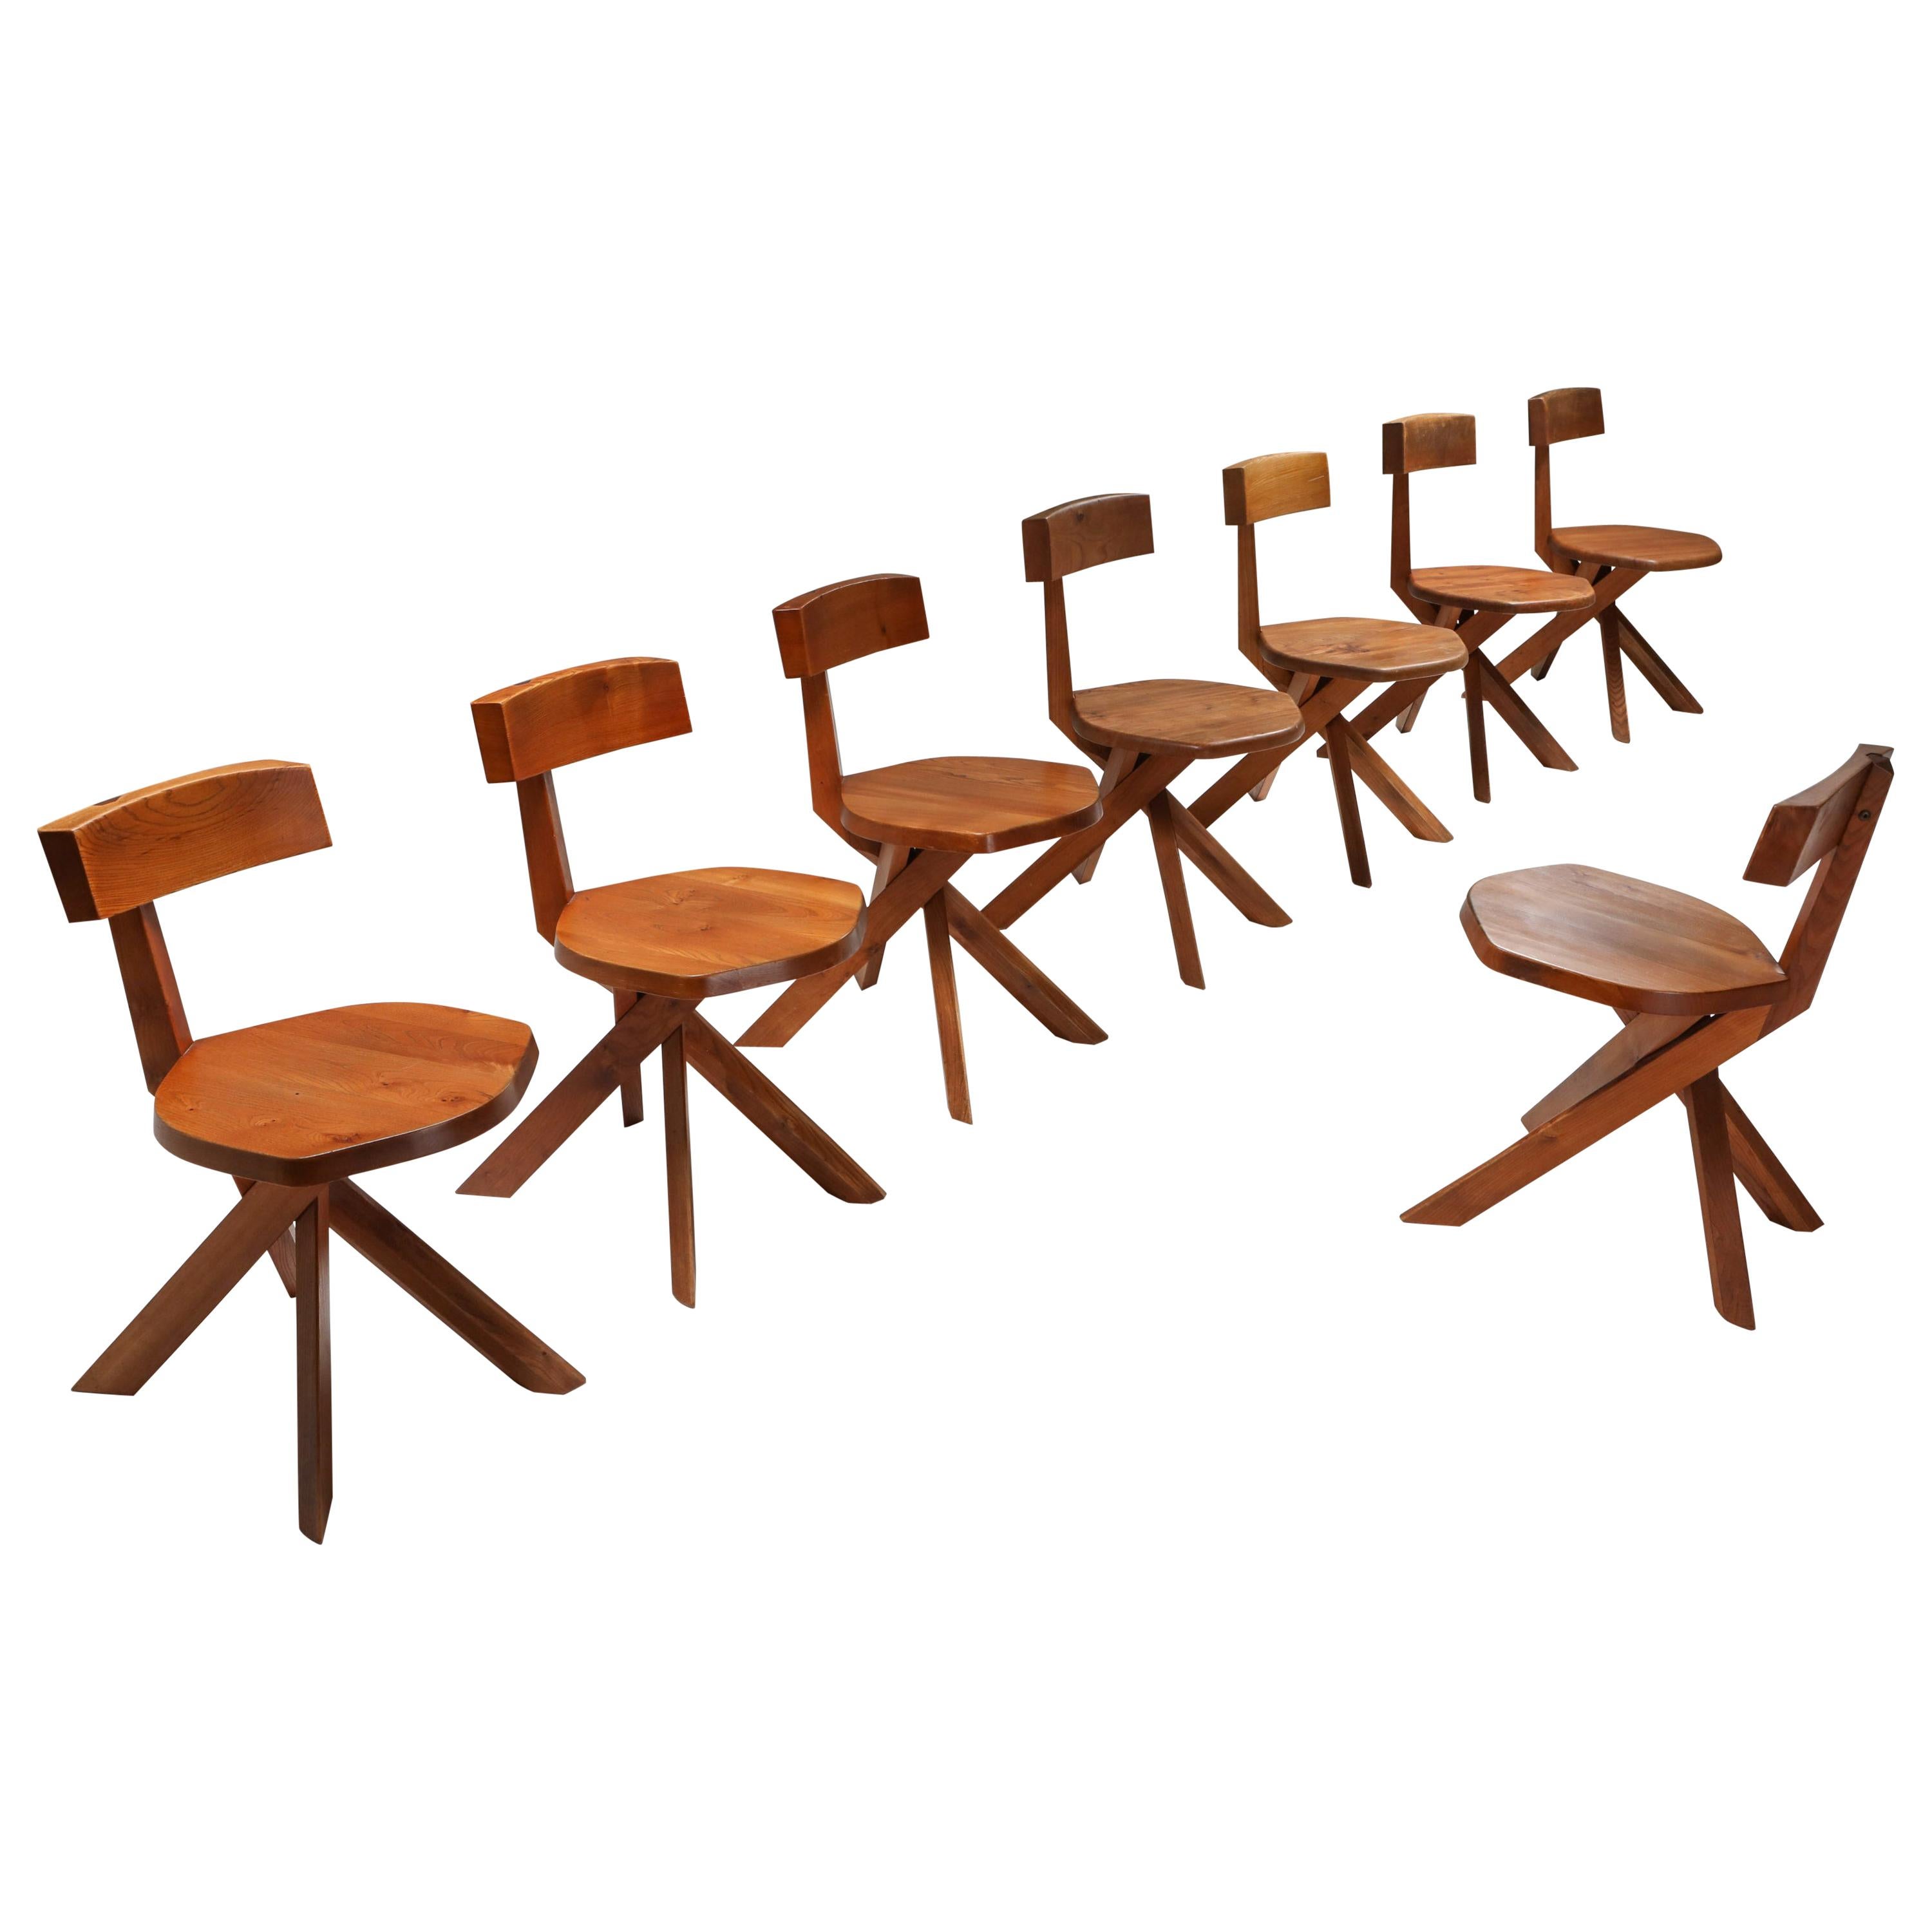 Pierre Chapo, Mid-Century Modern, solid elm S34 dining chairs, France, 1960s.

These chairs have the typical playful and majestic characteristics of Pierre Chapo's iconic designs. Asymmetric but yet in perfect balance.
The cross-legged base matches